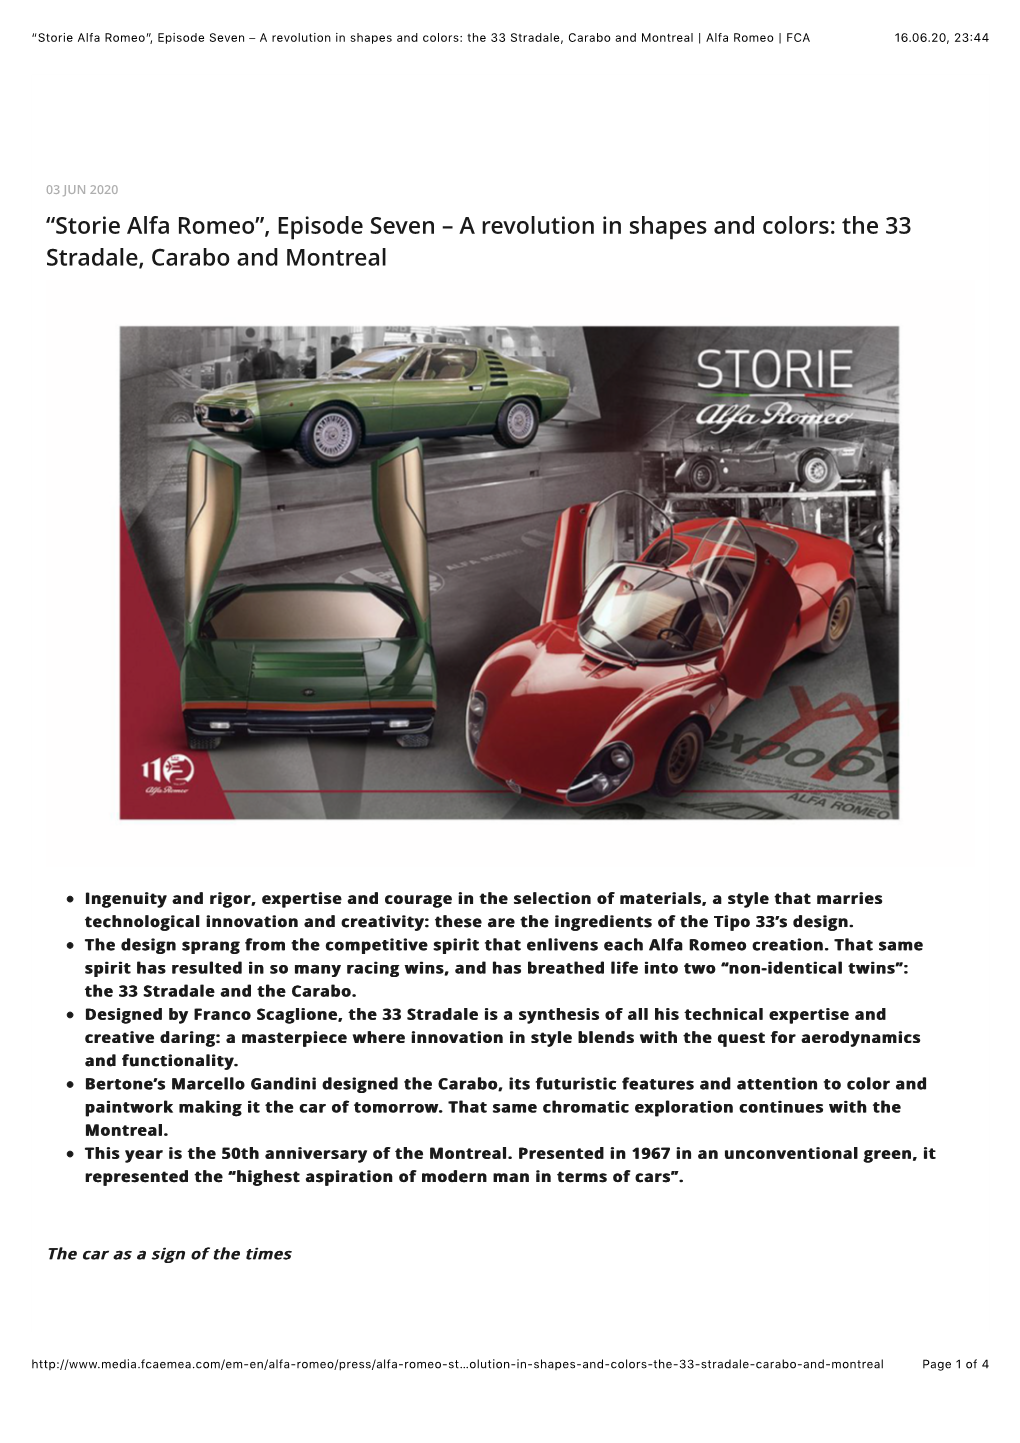 Storie Alfa Romeo”, Episode Seven – a Revolution in Shapes and Colors: the 33 Stradale, Carabo and Montreal | Alfa Romeo | FCA 16.06.20, 23�44